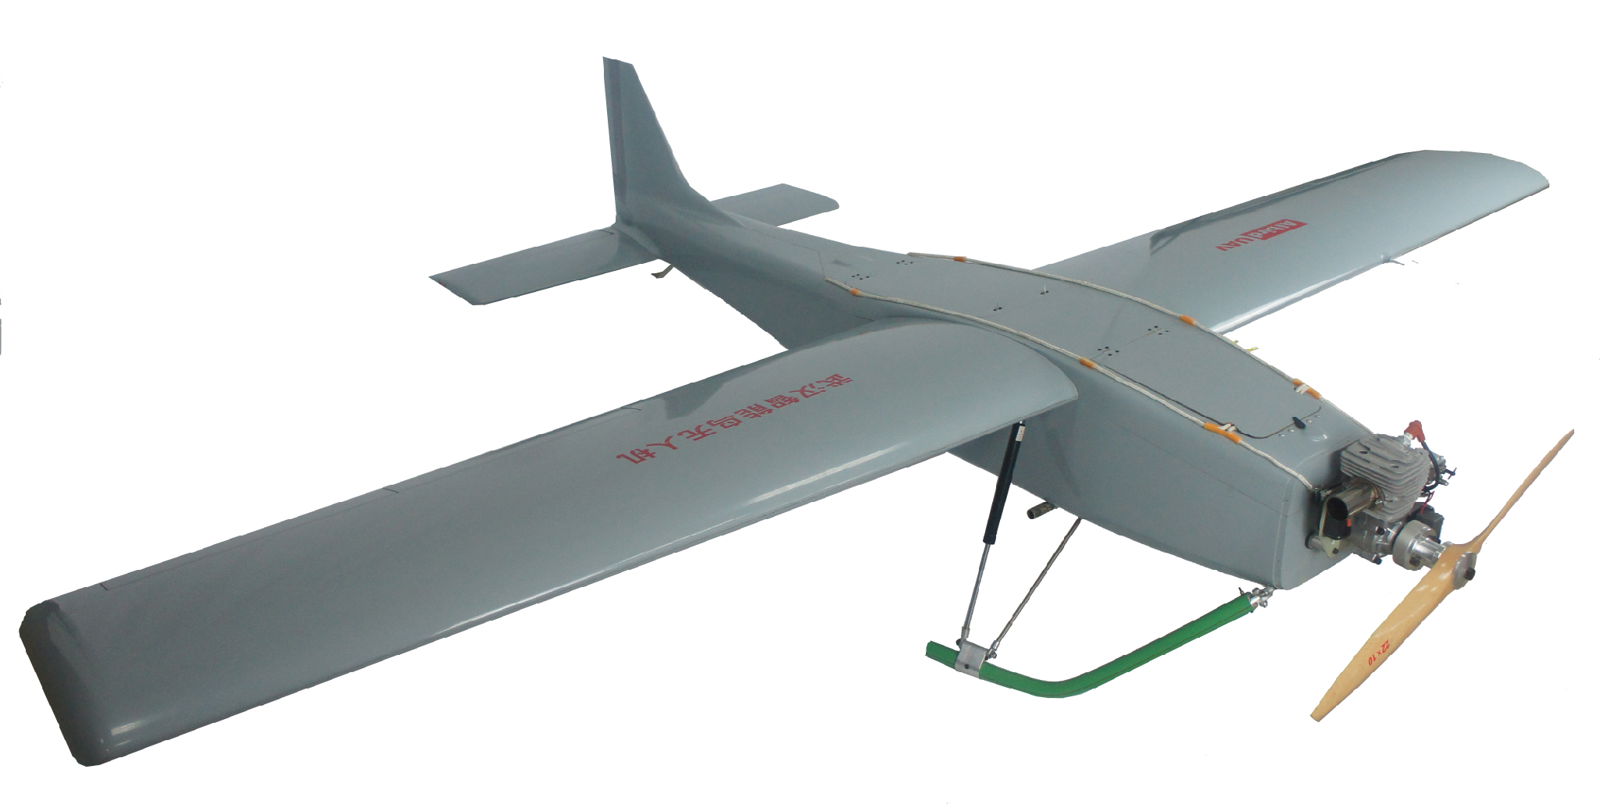 AIBIRD UAV KC2800 fixed wing drone for Mapping & Surveillance